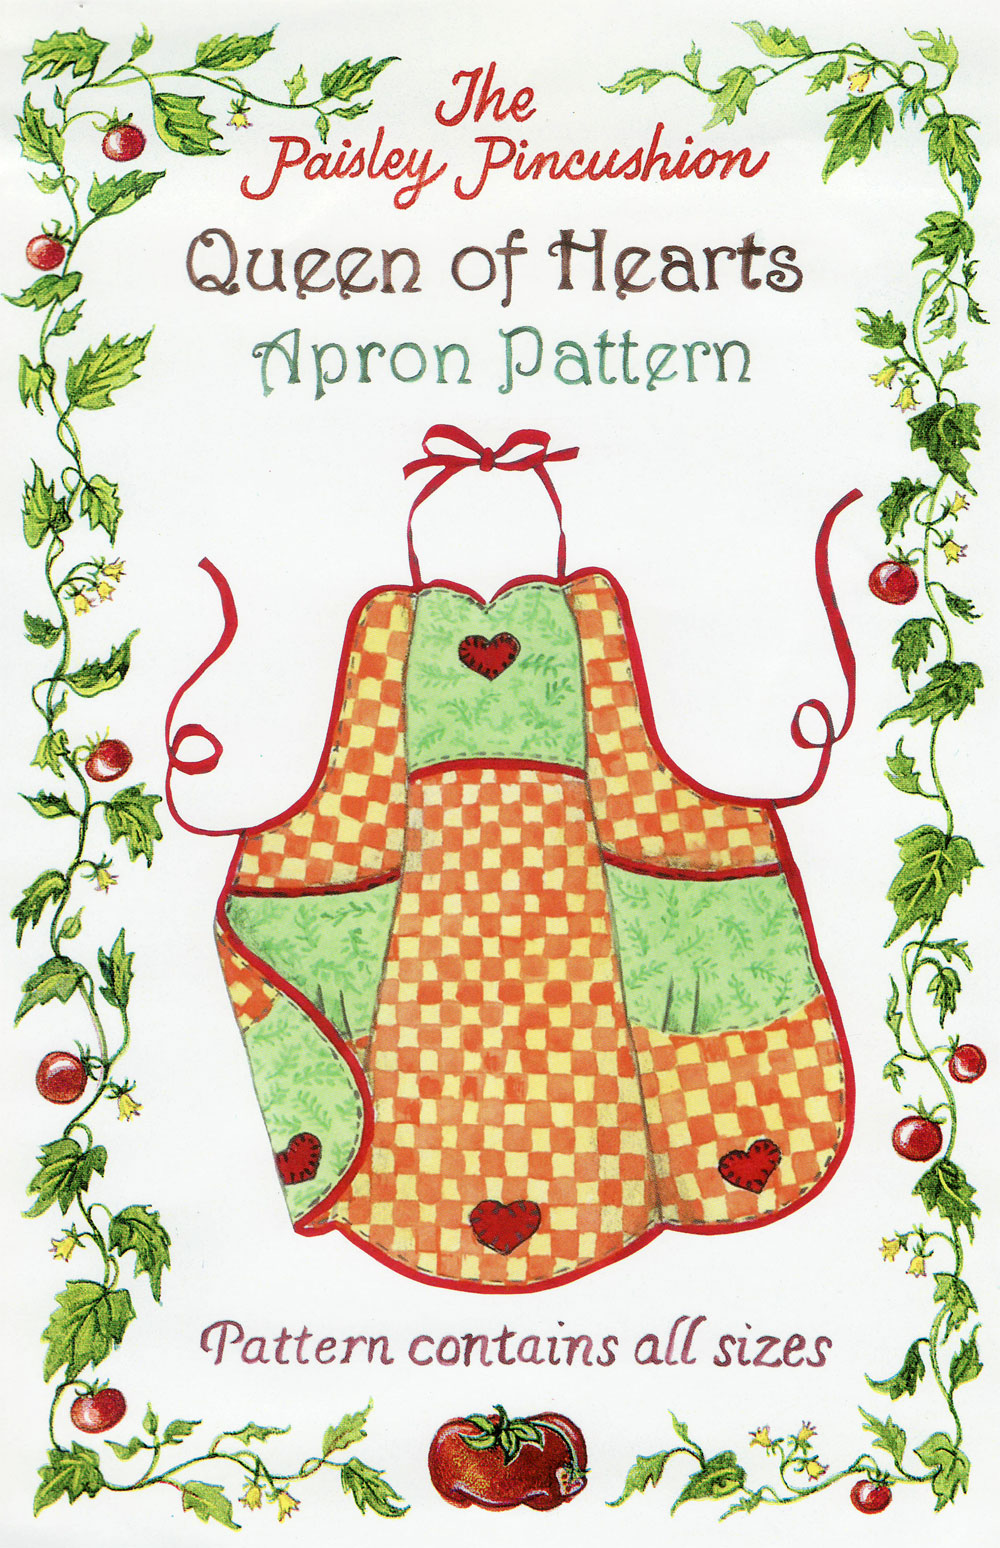 queen-of-hearts-sewing-pattern-paisley-pincushion-front